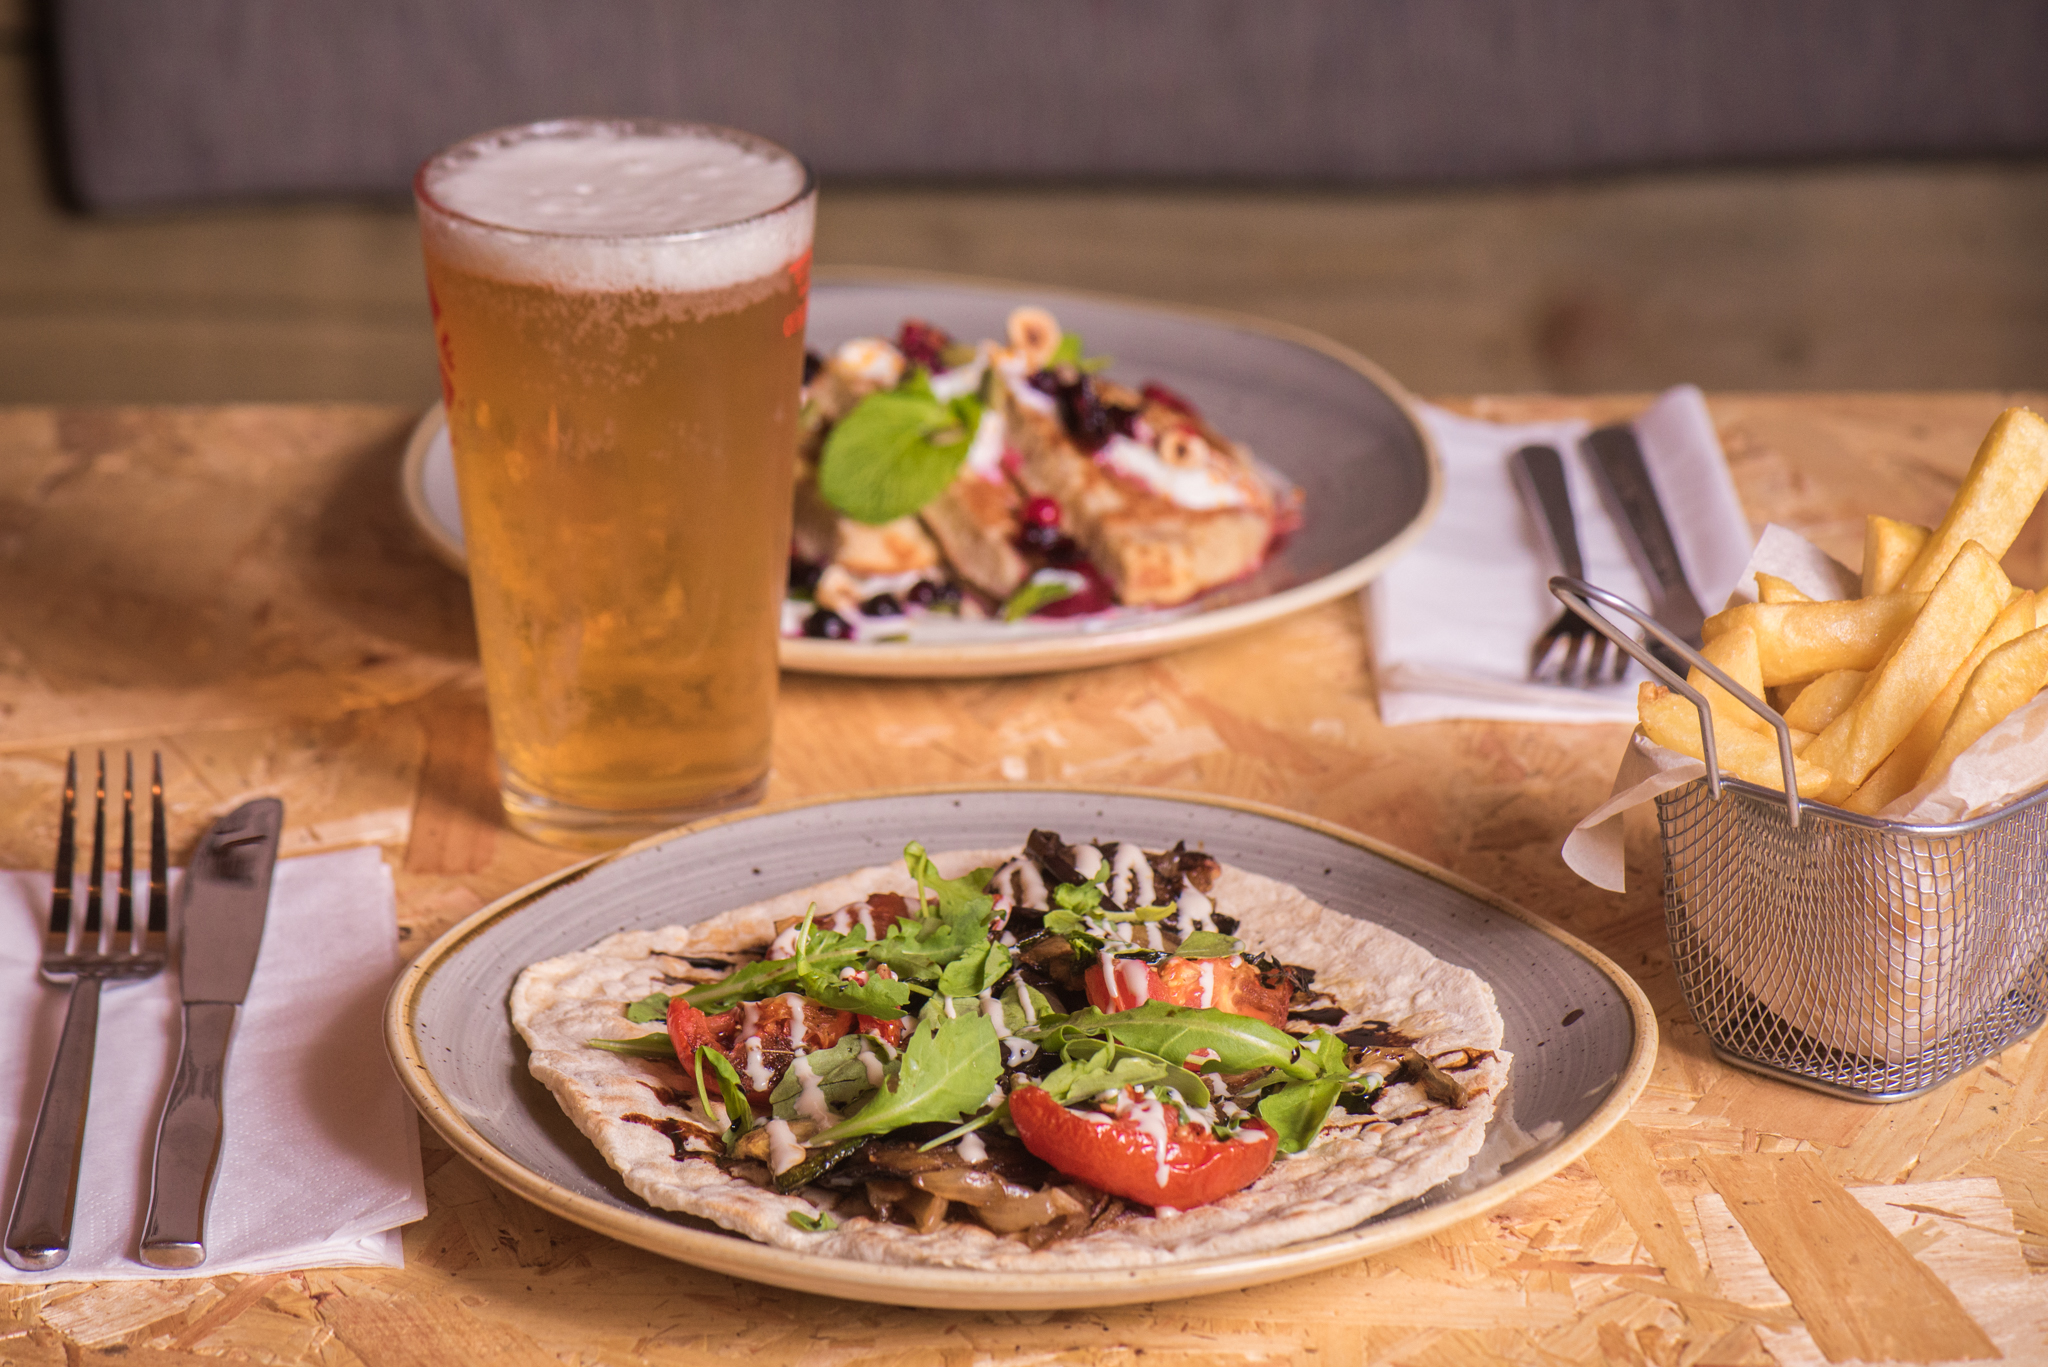 A table set for two, with two mains and a pint of beer. One main is savoury with flat bread salad and mushrooms and the other is sweet with berries, nuts and seads. 